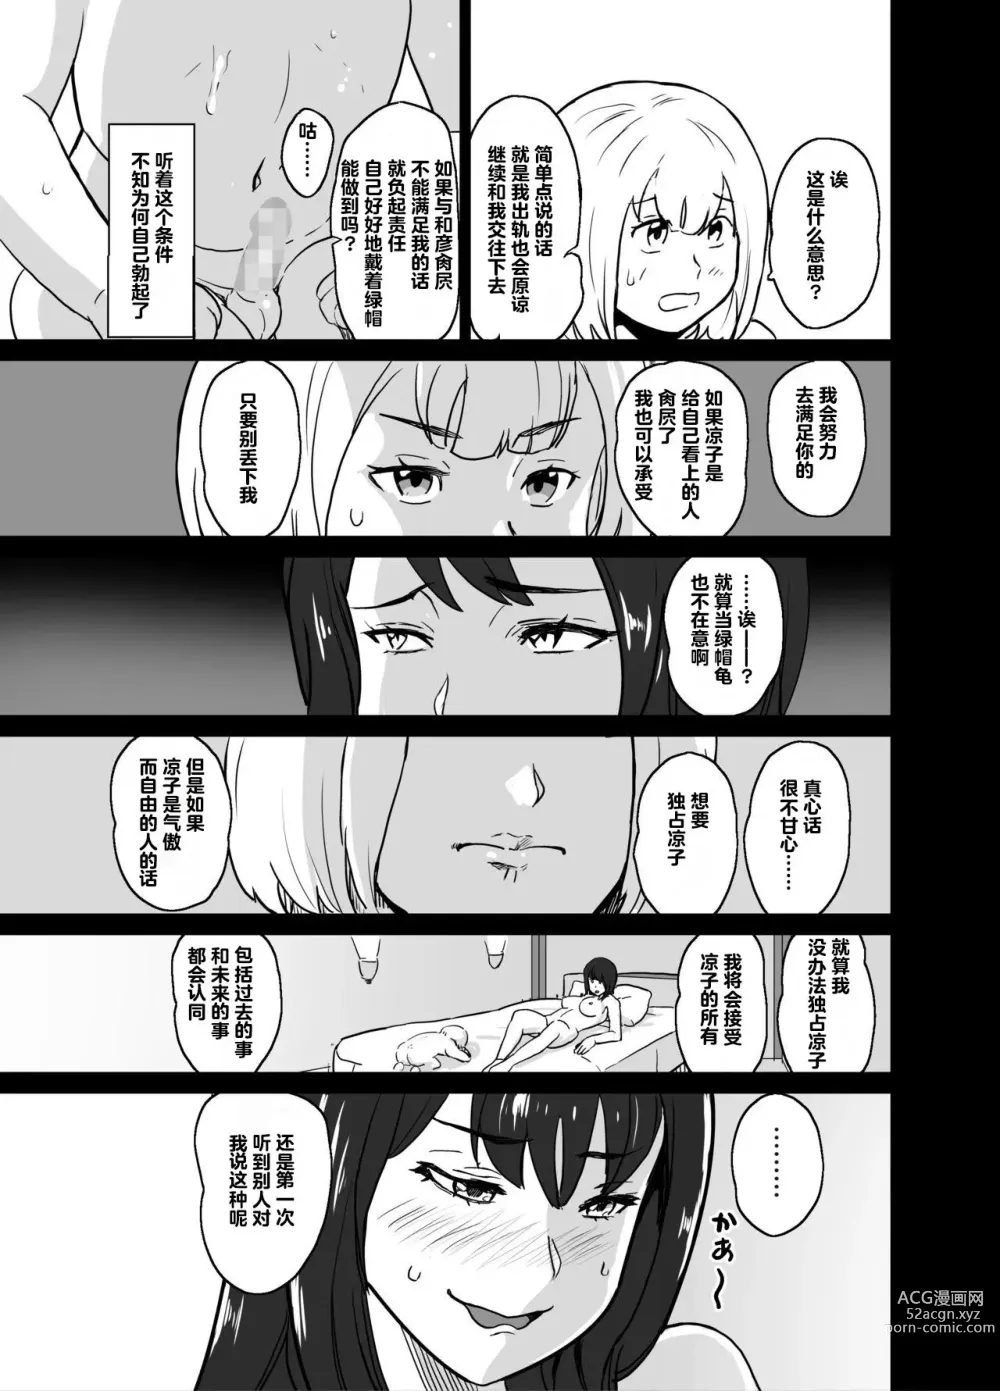 Page 11 of doujinshi older girlfriend who reports cheating while flirting love